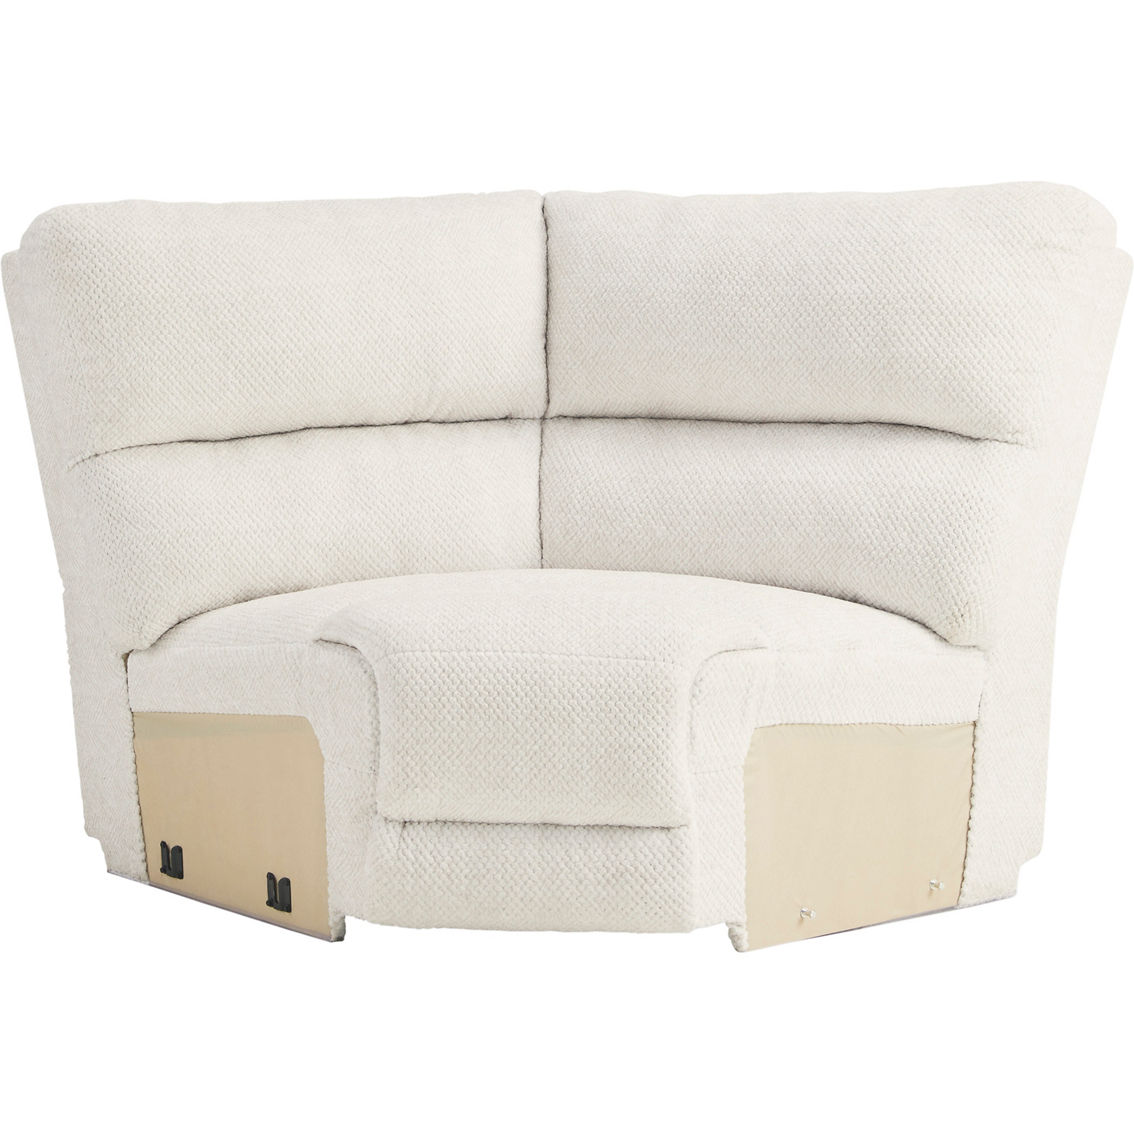 Signature Design by Ashley Keensburg 3pc. Power Reclining Sectional - Image 4 of 6